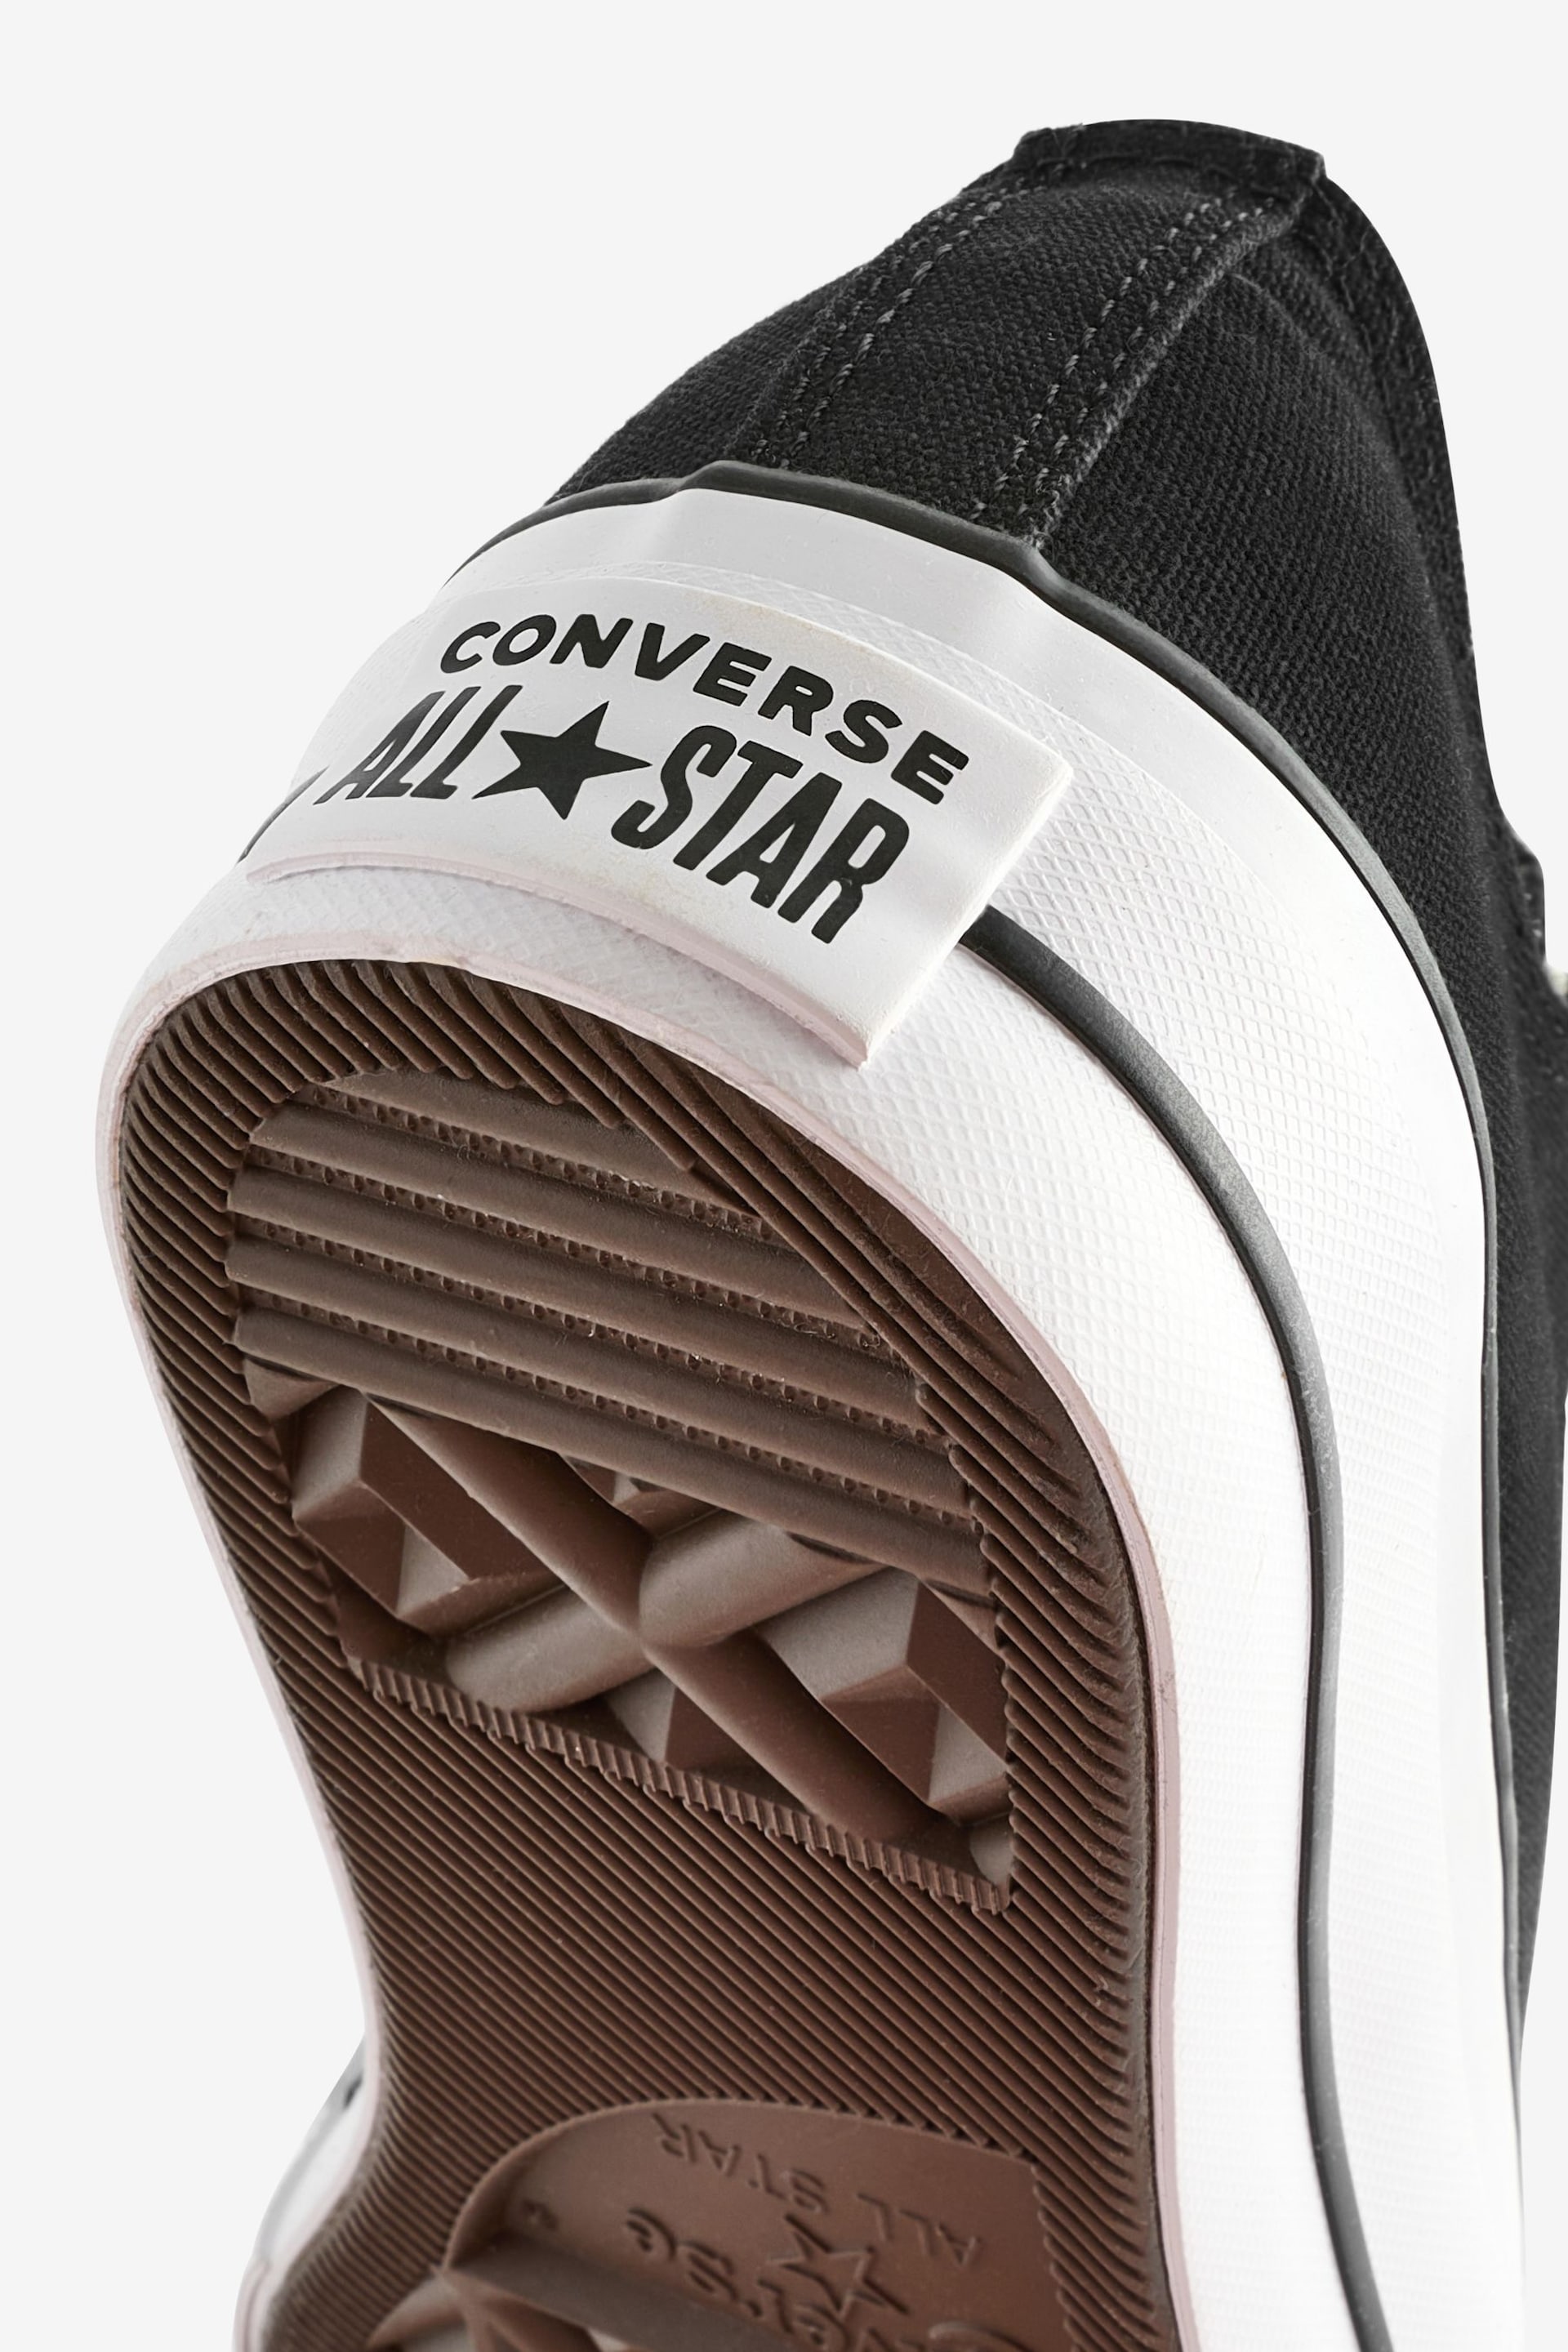 Converse Black Chuck Taylor All Star Lift Ox Trainers - Image 7 of 9